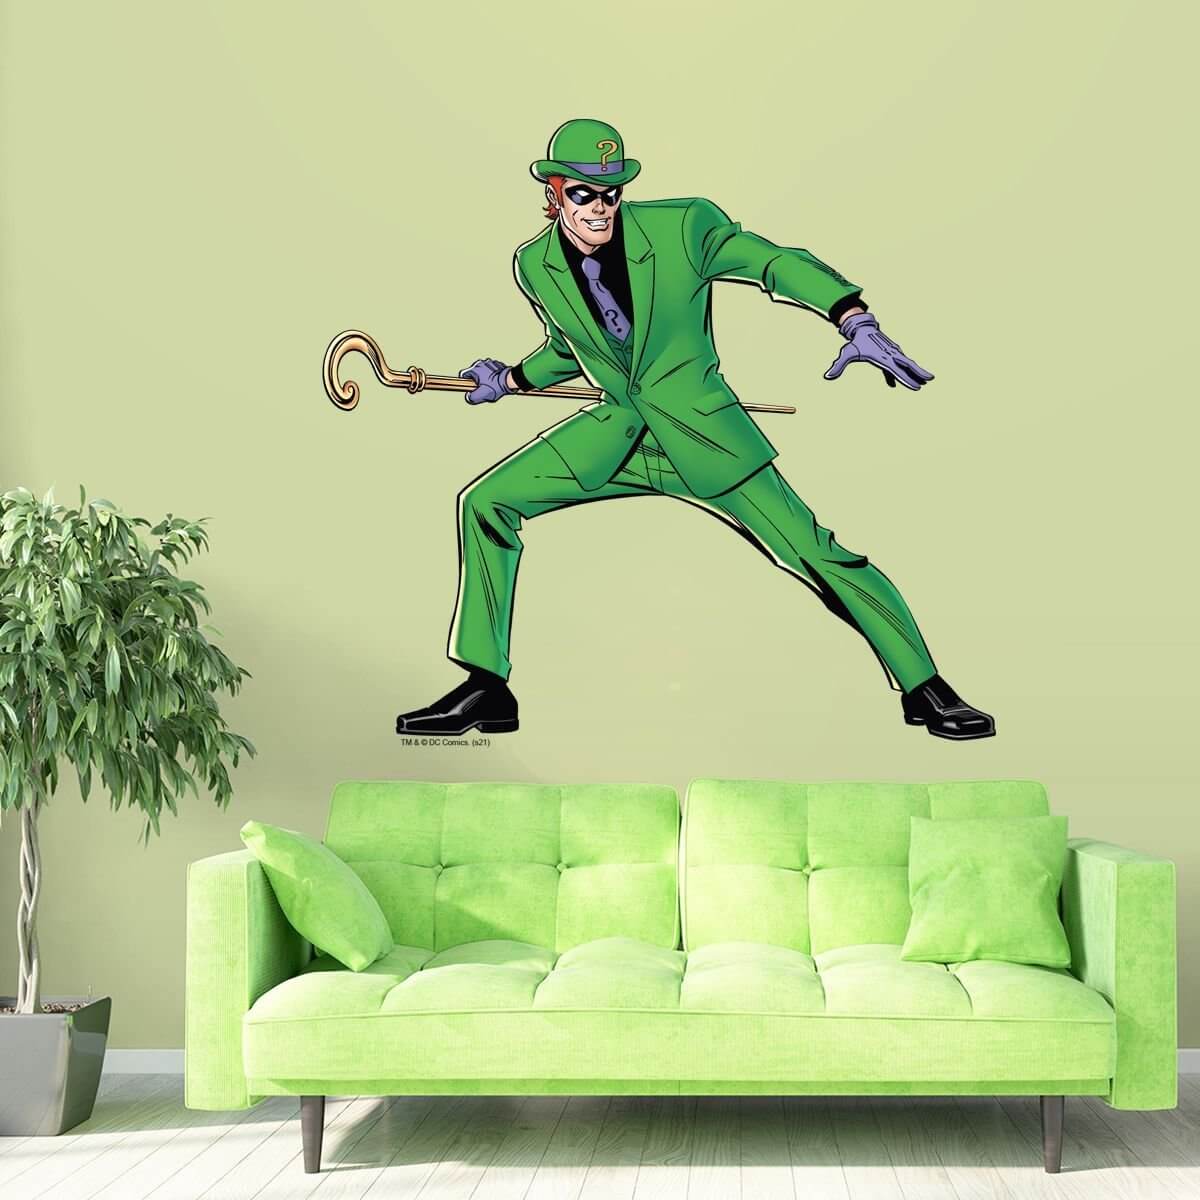 Kismet Decals Riddler Puzzle Master Licensed Wall Sticker - Easy DIY Justice League Home & Room Decor Wall Art - Kismet Decals